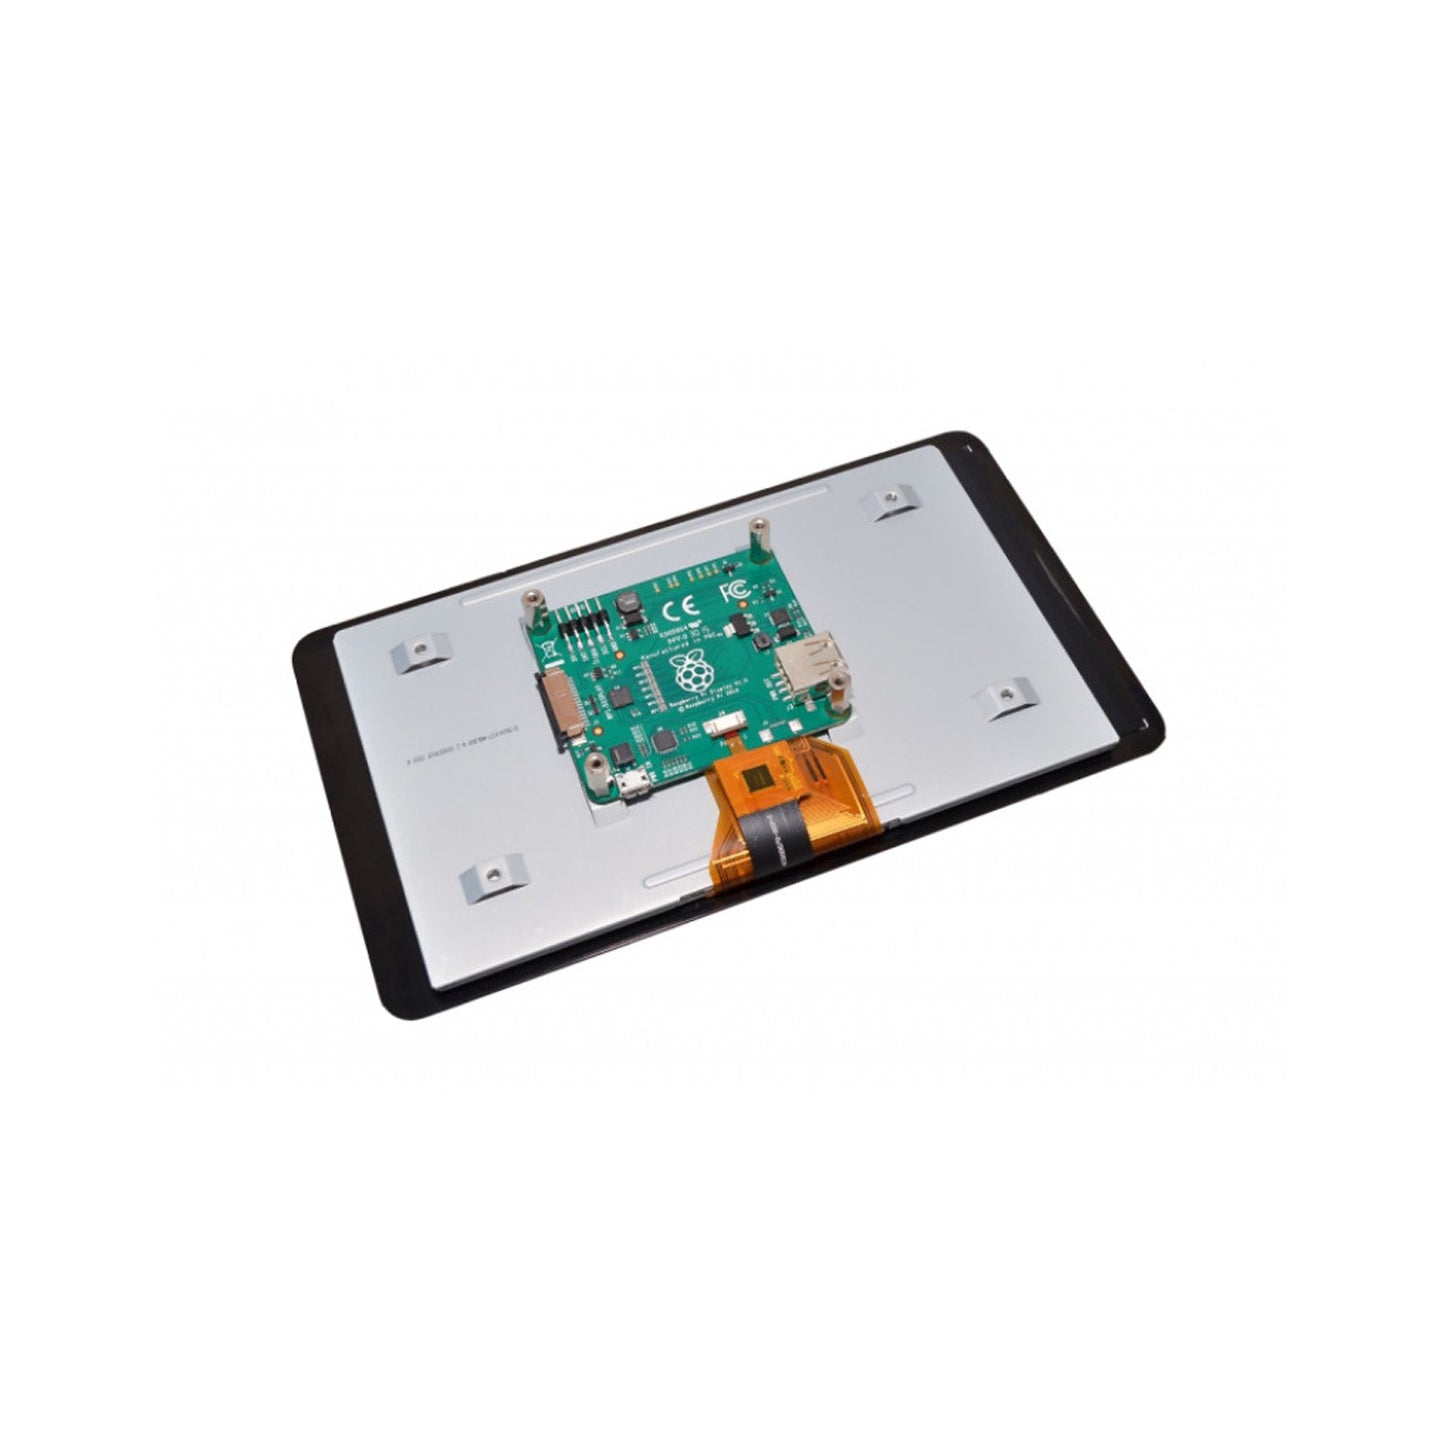 7 Inch Official Raspberry Pi Display 19.4 cm (7 Inch) Official Raspberry Pi Display With Capacitive Touchscreen - RS3069